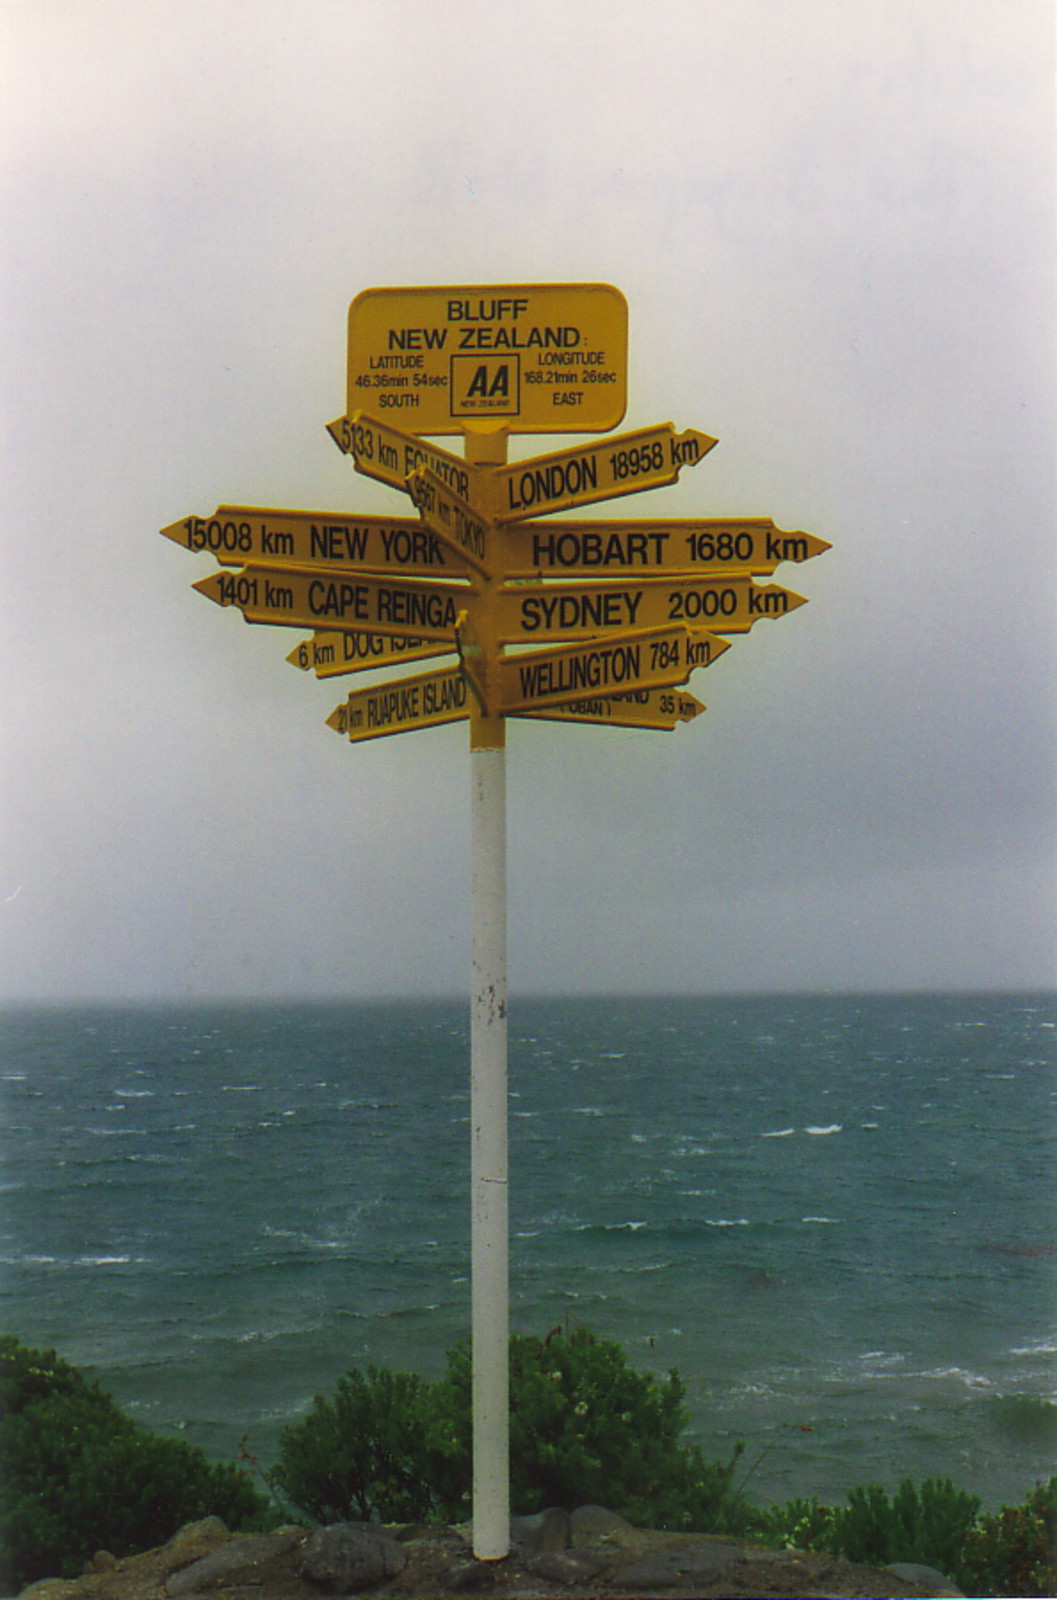 The signpost at Bluff